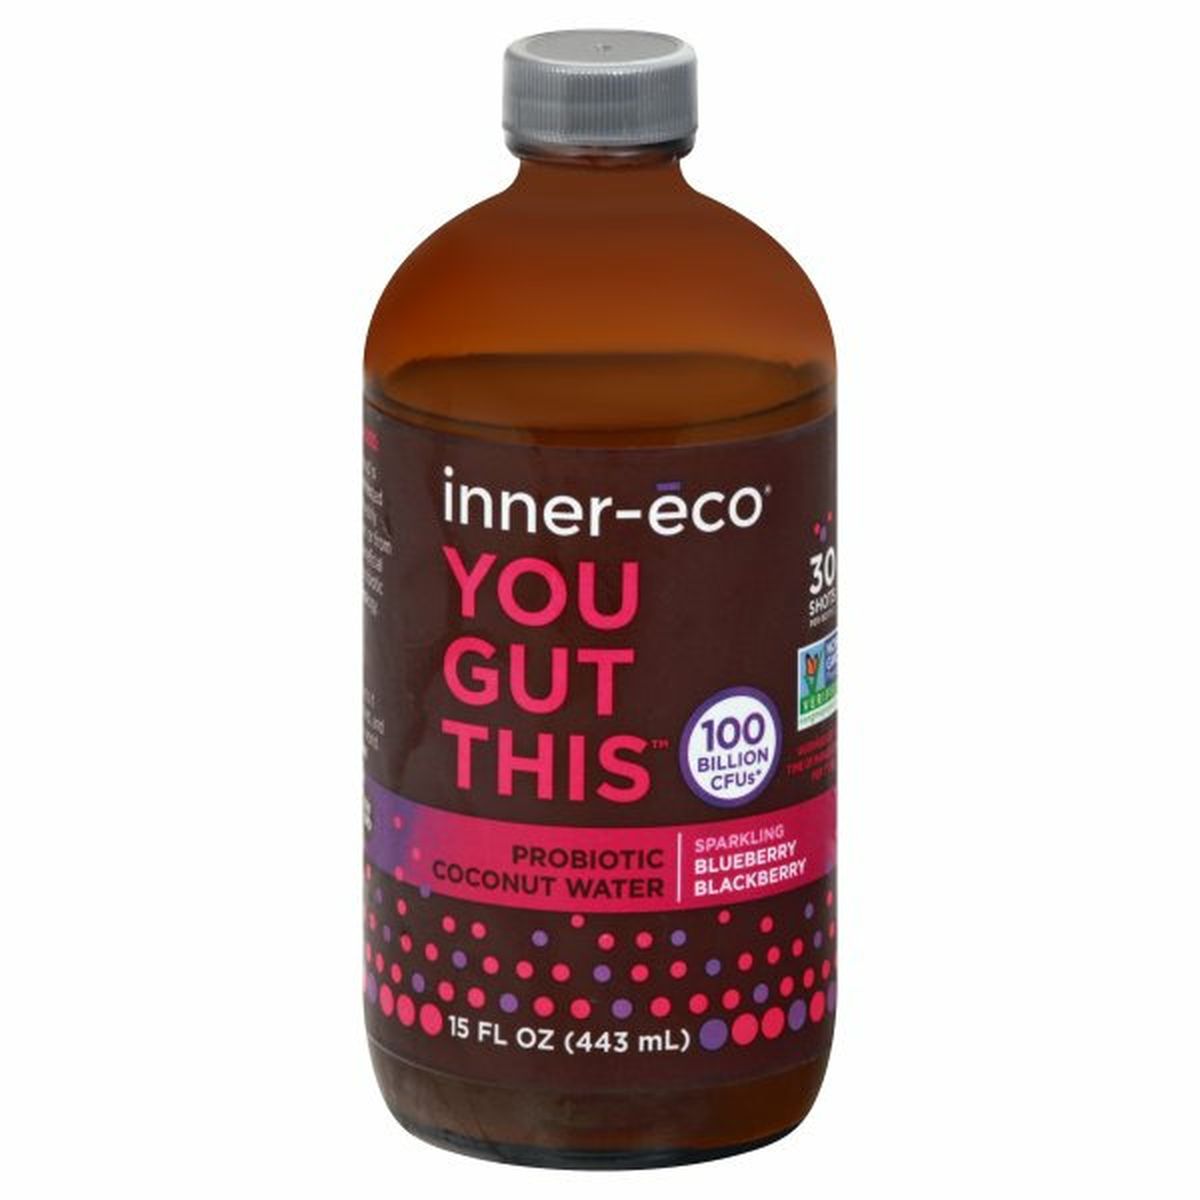 Calories in Inner Eco Probiotic Coconut Water, Sparkling Blueberry Blackberry